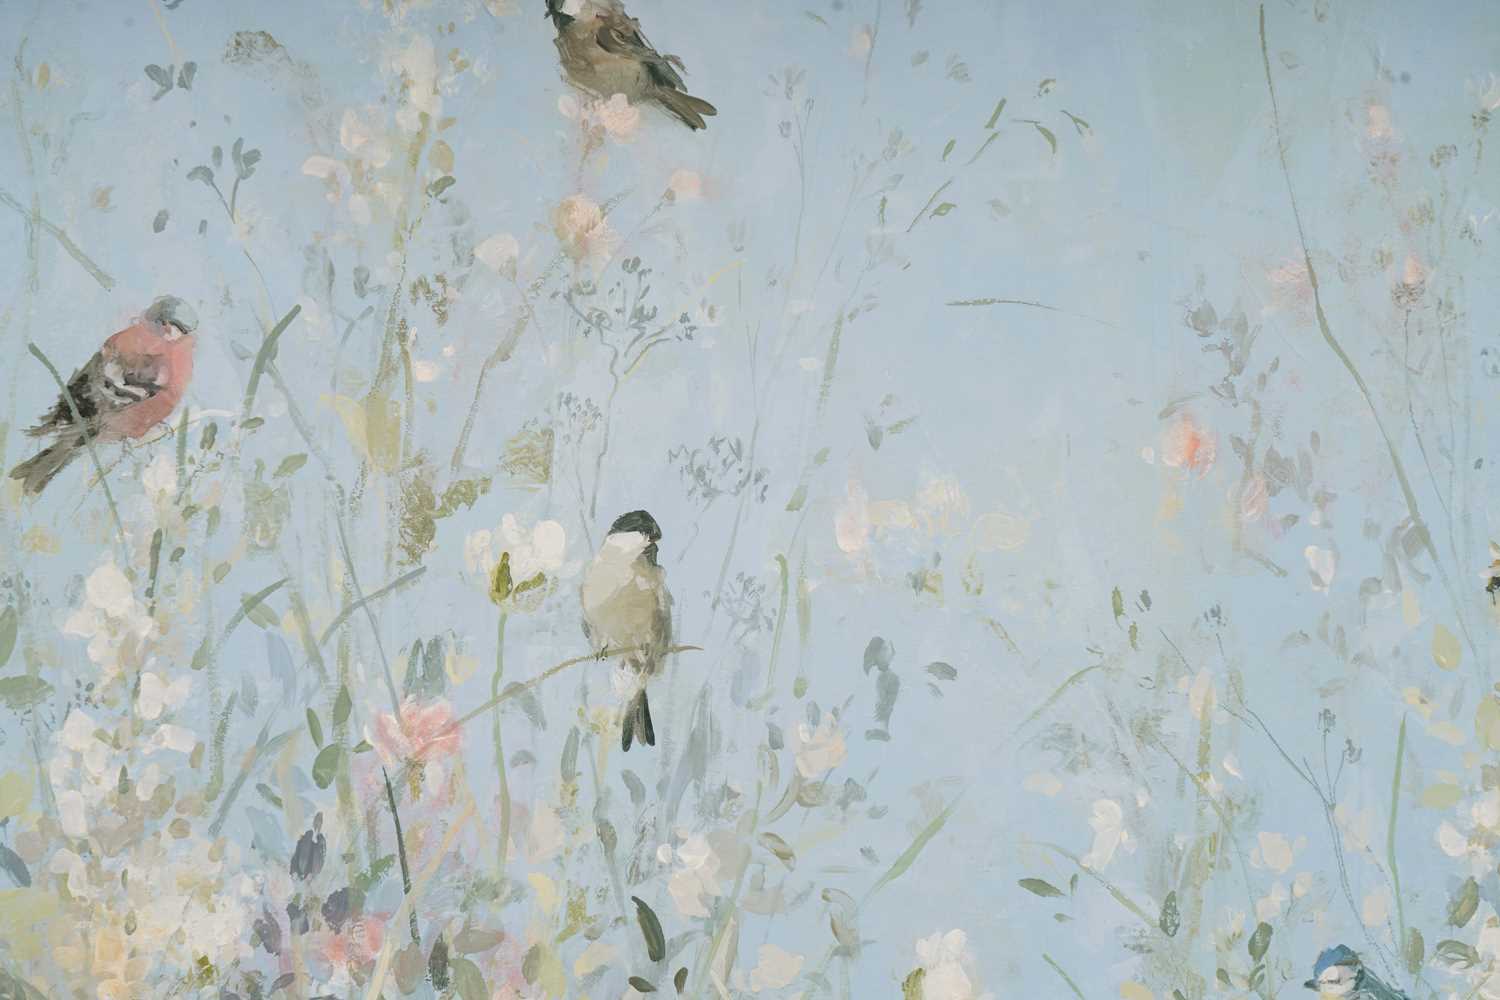 Fletcher Prentice - Spring Birds and White Flowers | acrylic on canvas - Image 3 of 3